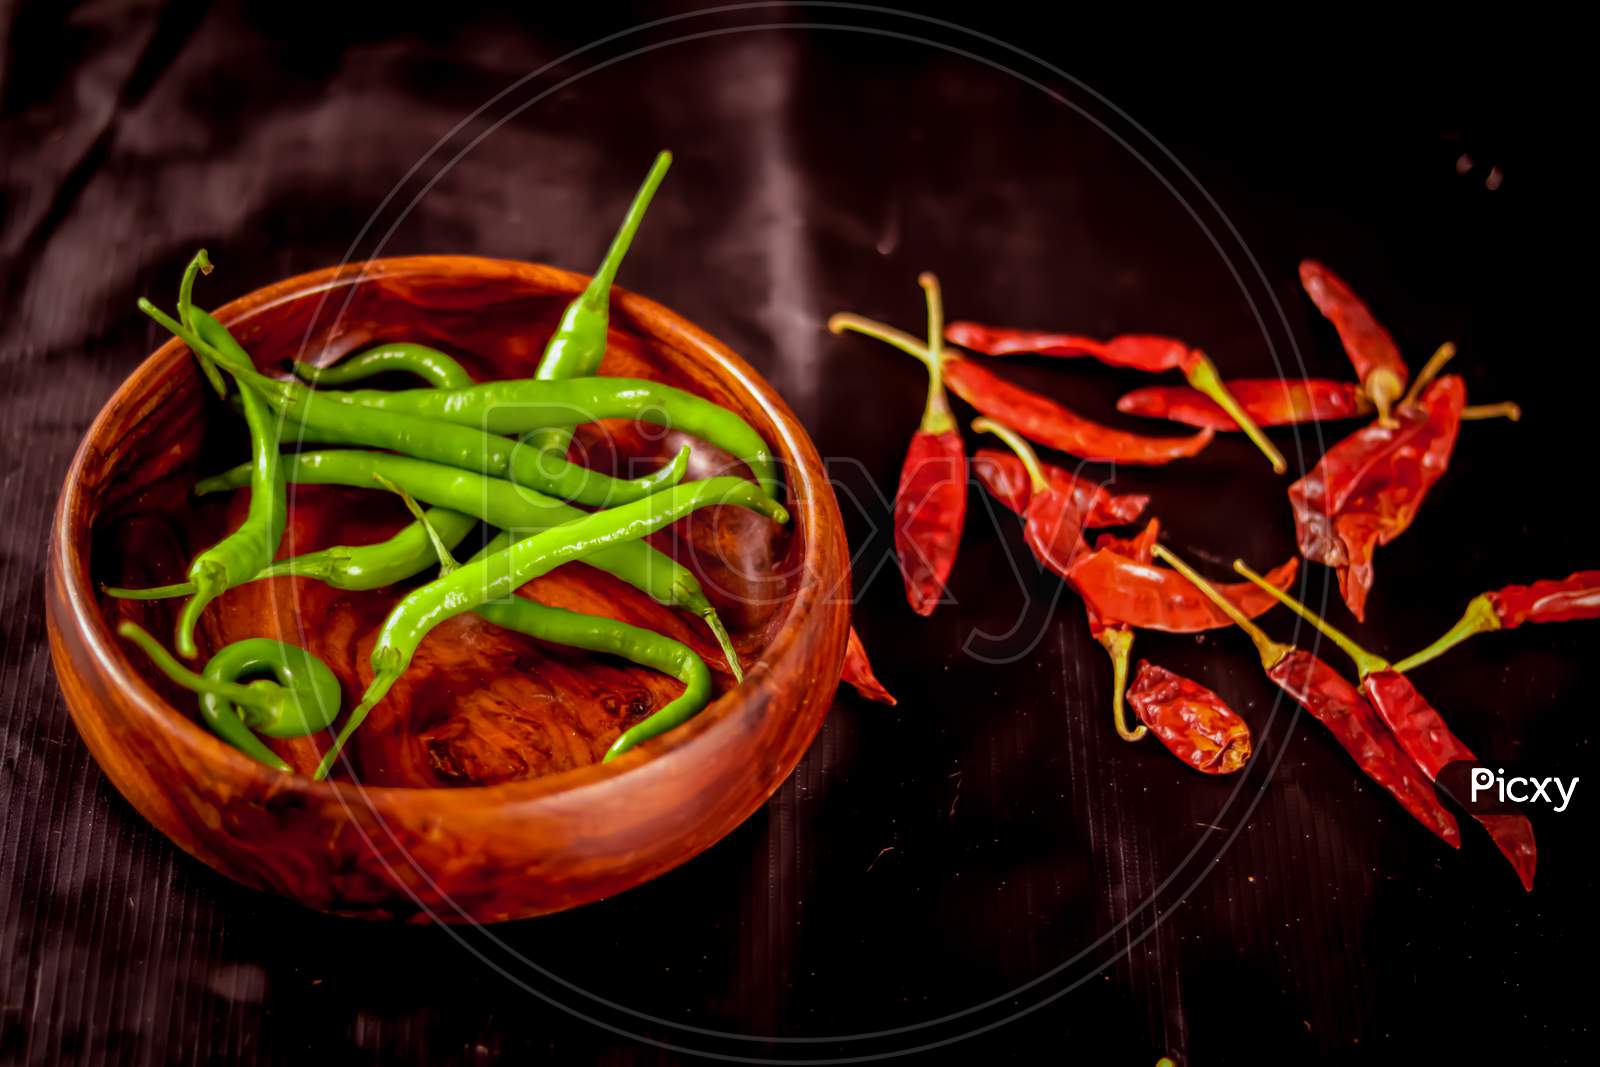 The Green Chillies Are Falling Into The Wooden Bowl,Fresh Green Chili In Wooden Bowl With Black Background,Green Pepper Or Chili